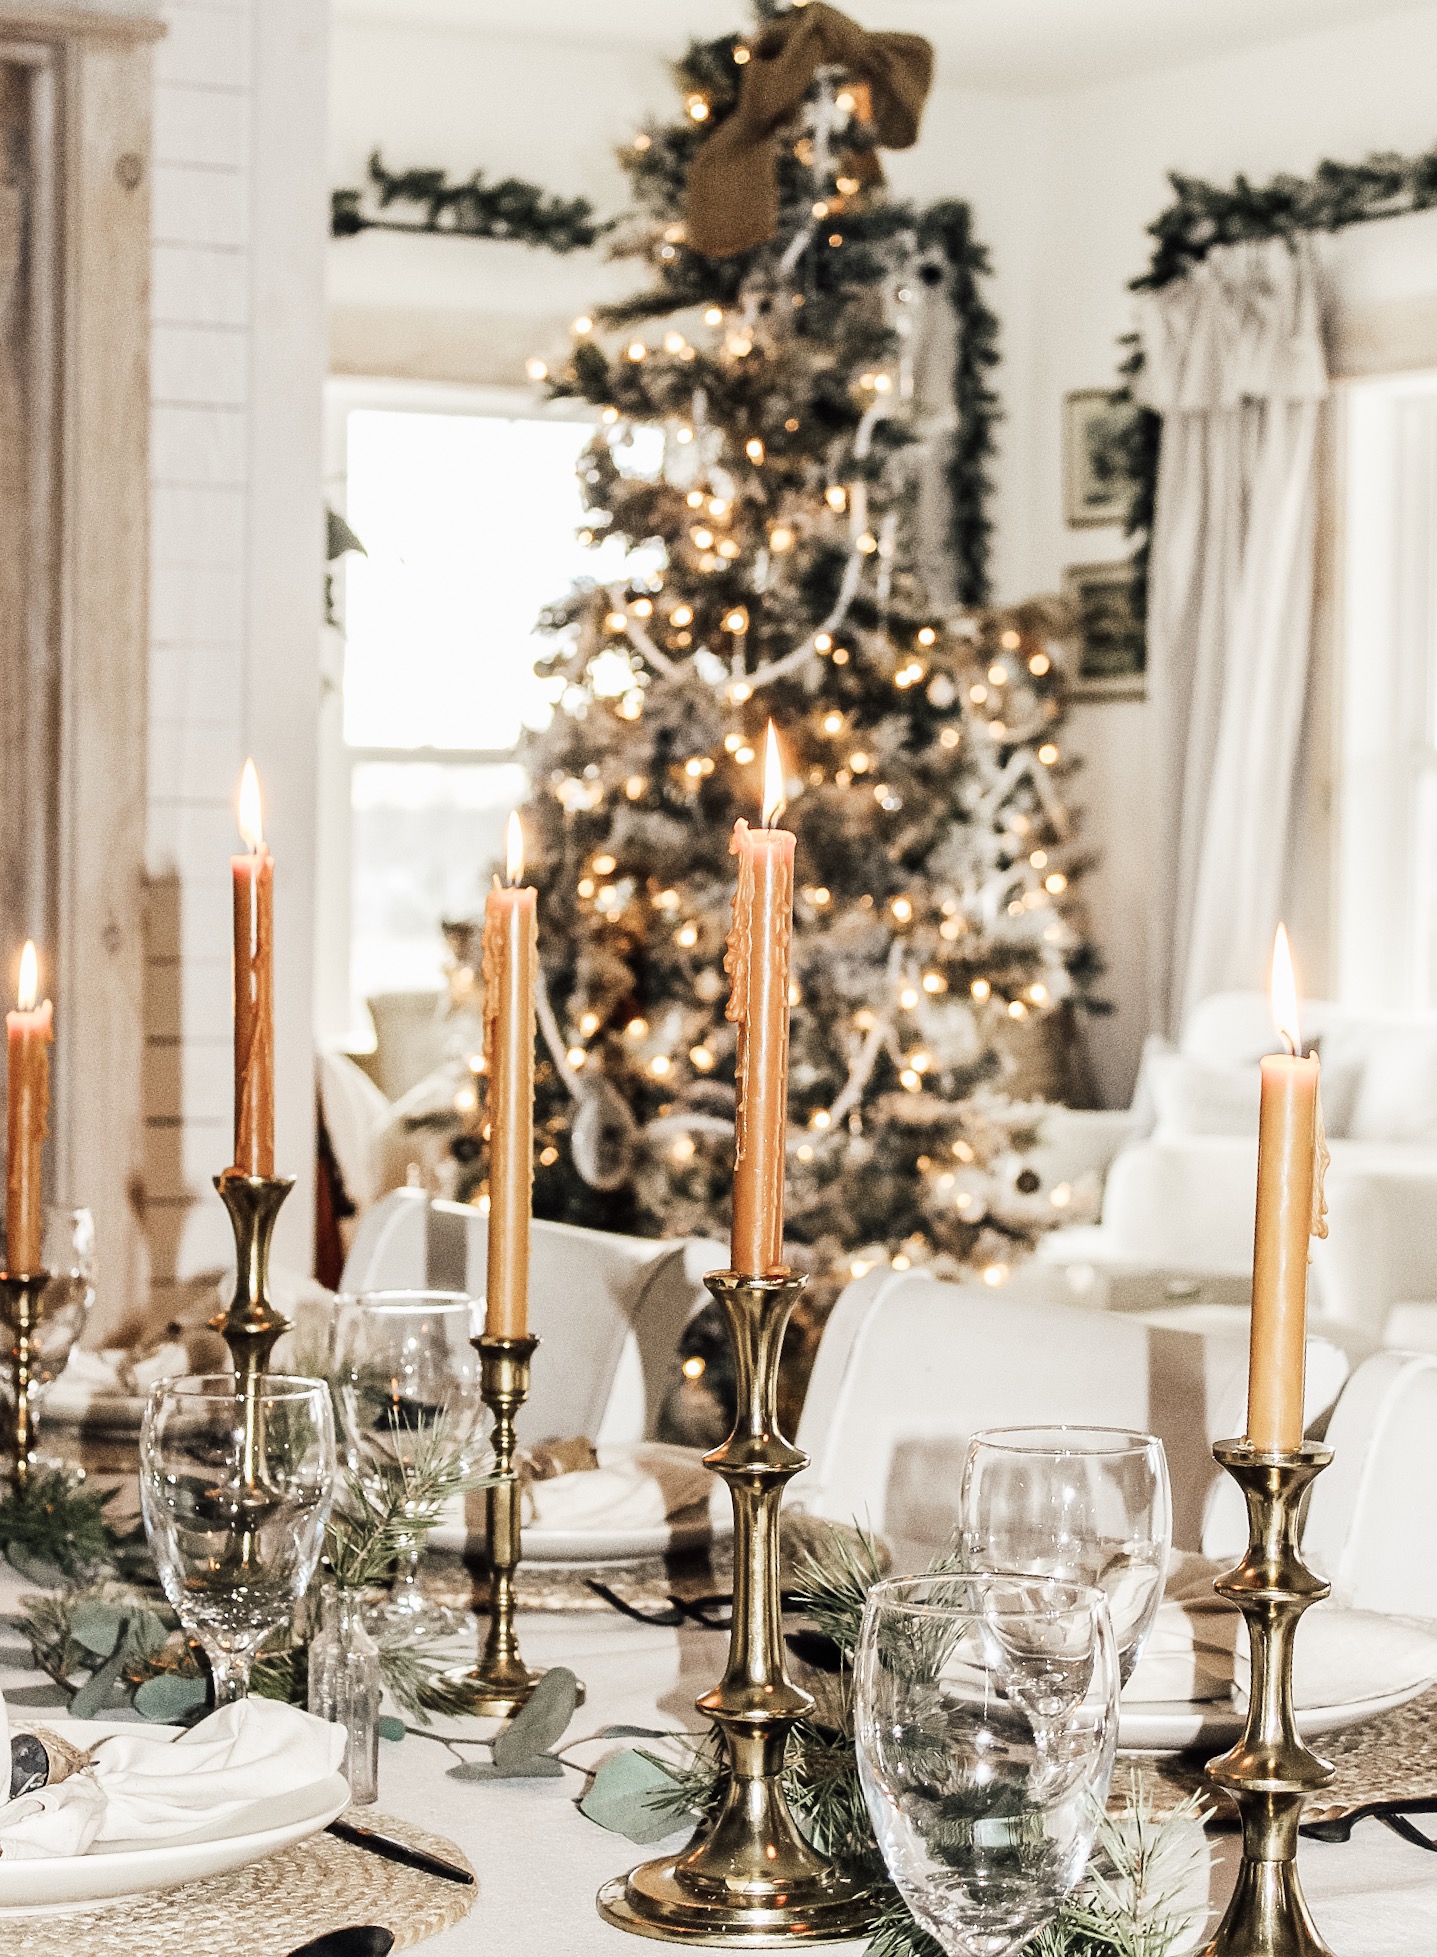 5 Things to Incorporate for an Effortless Christmas Tablescape